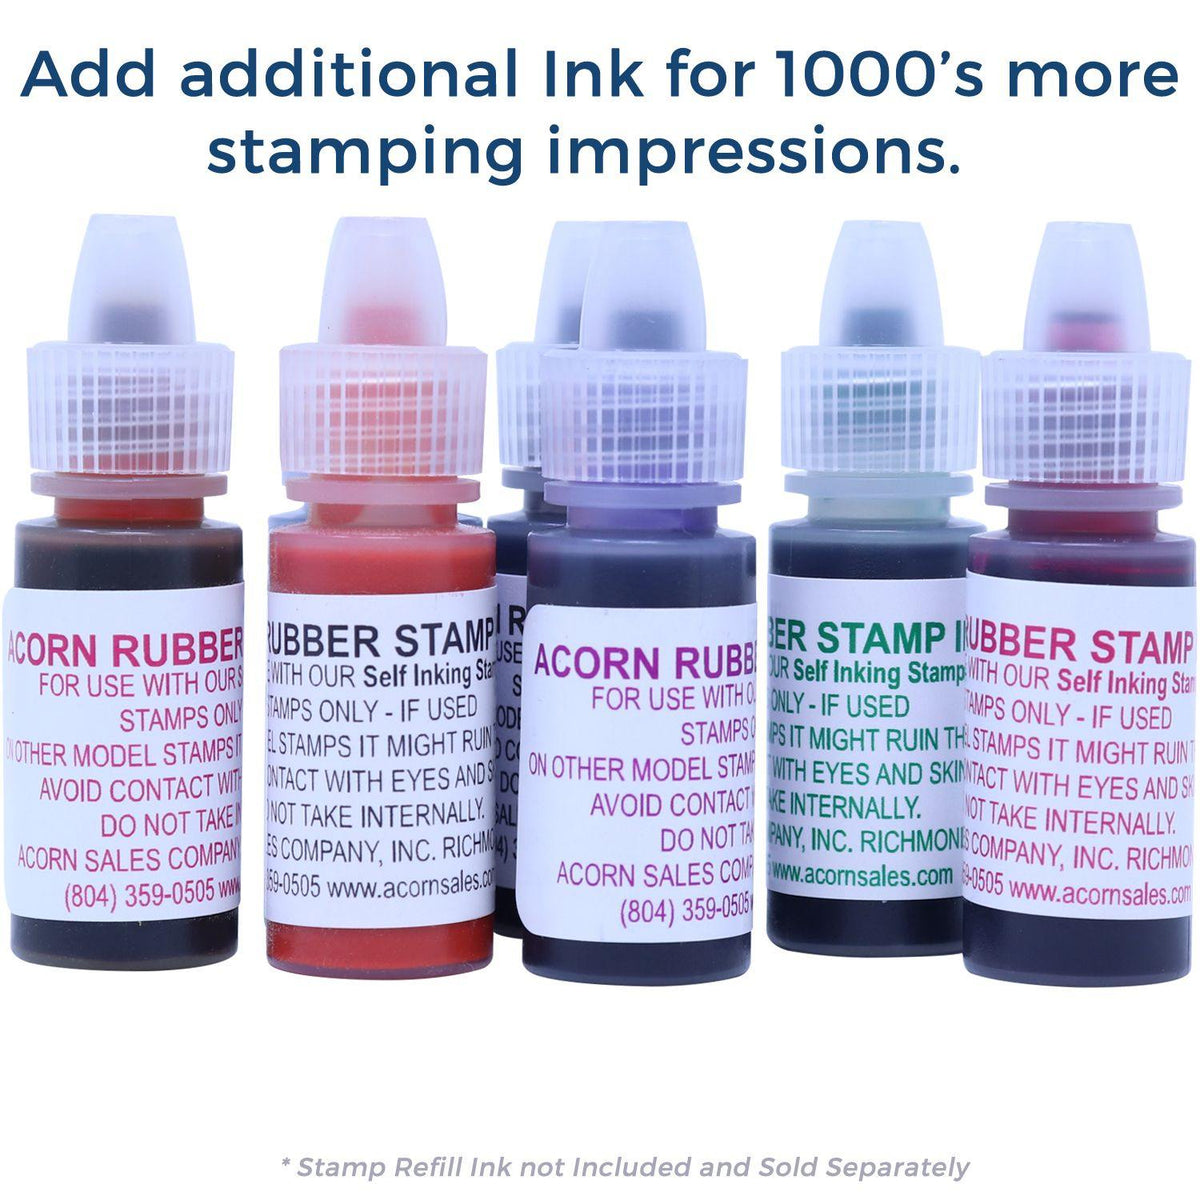 Refill Inks for Large Pre-Inked Review and Sign Stamp Available